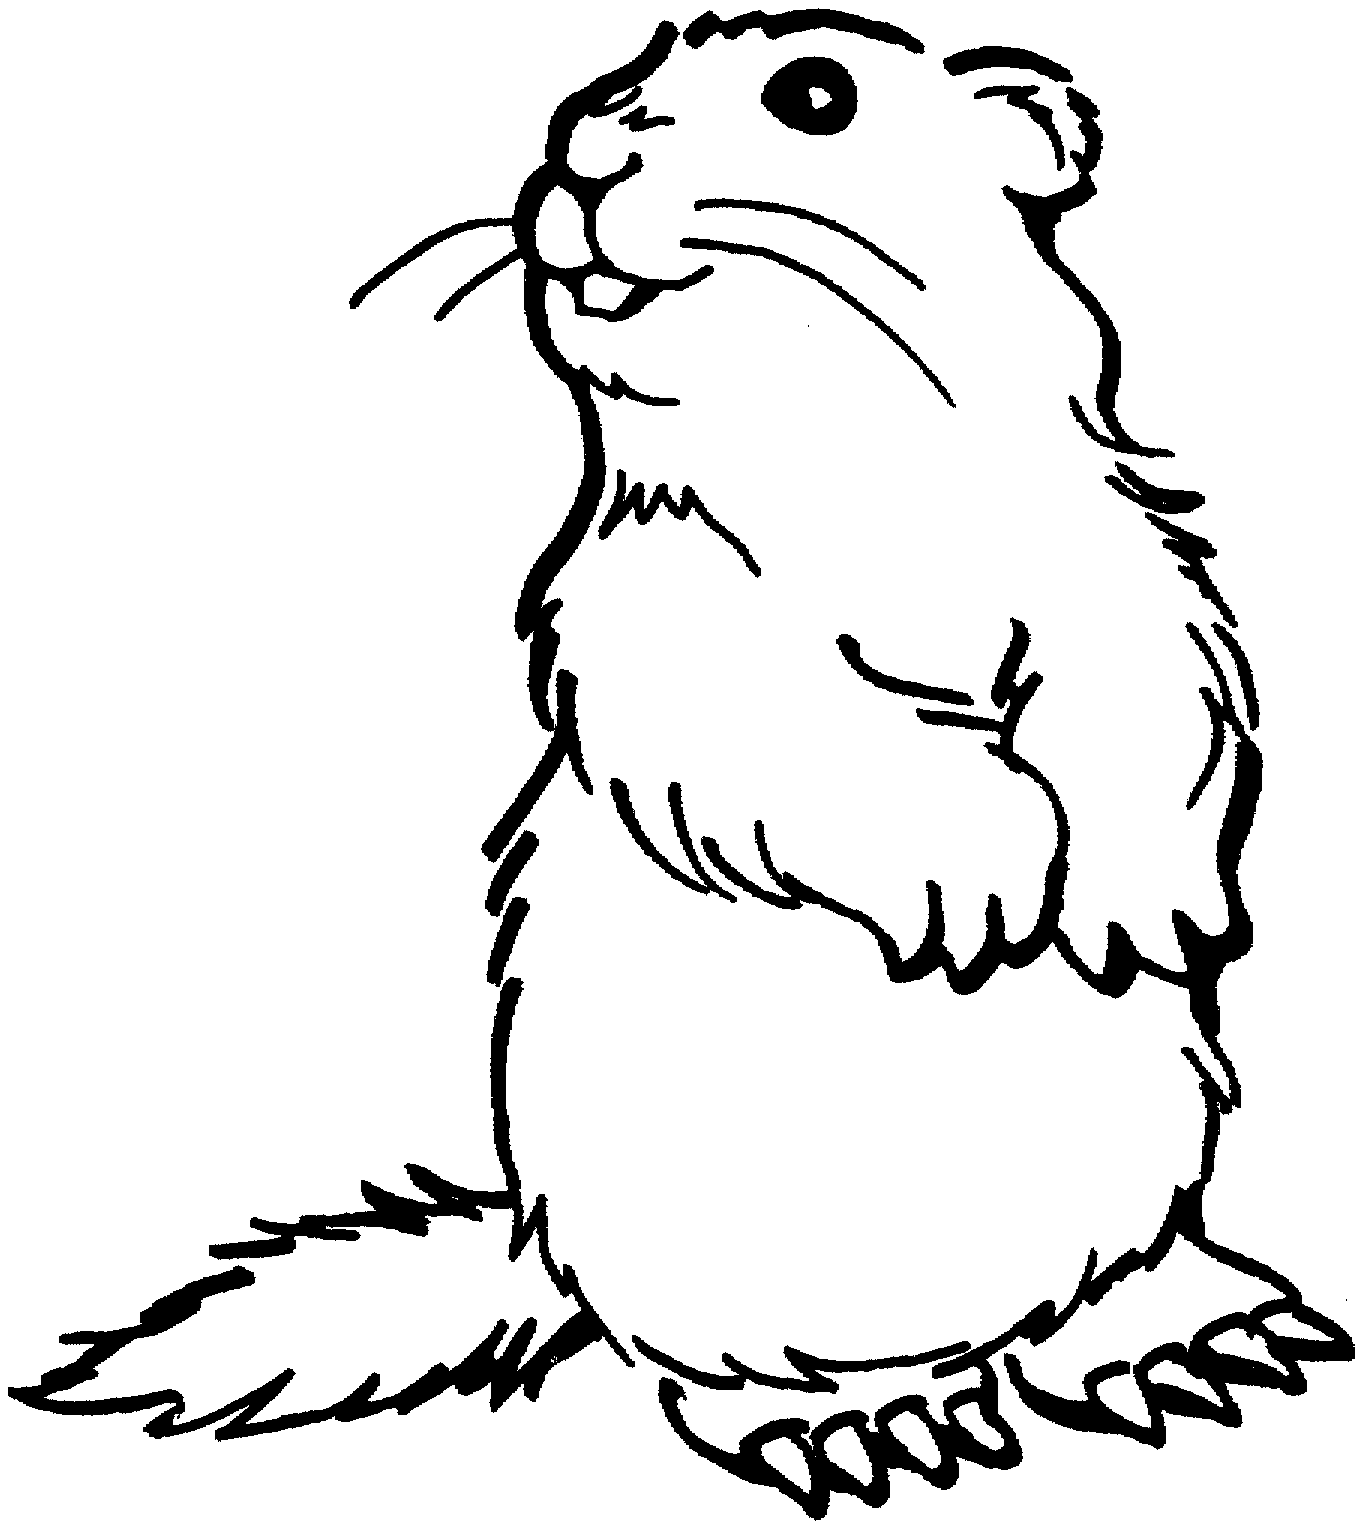 Grassland Animals Coloring Pages   Coloring Home